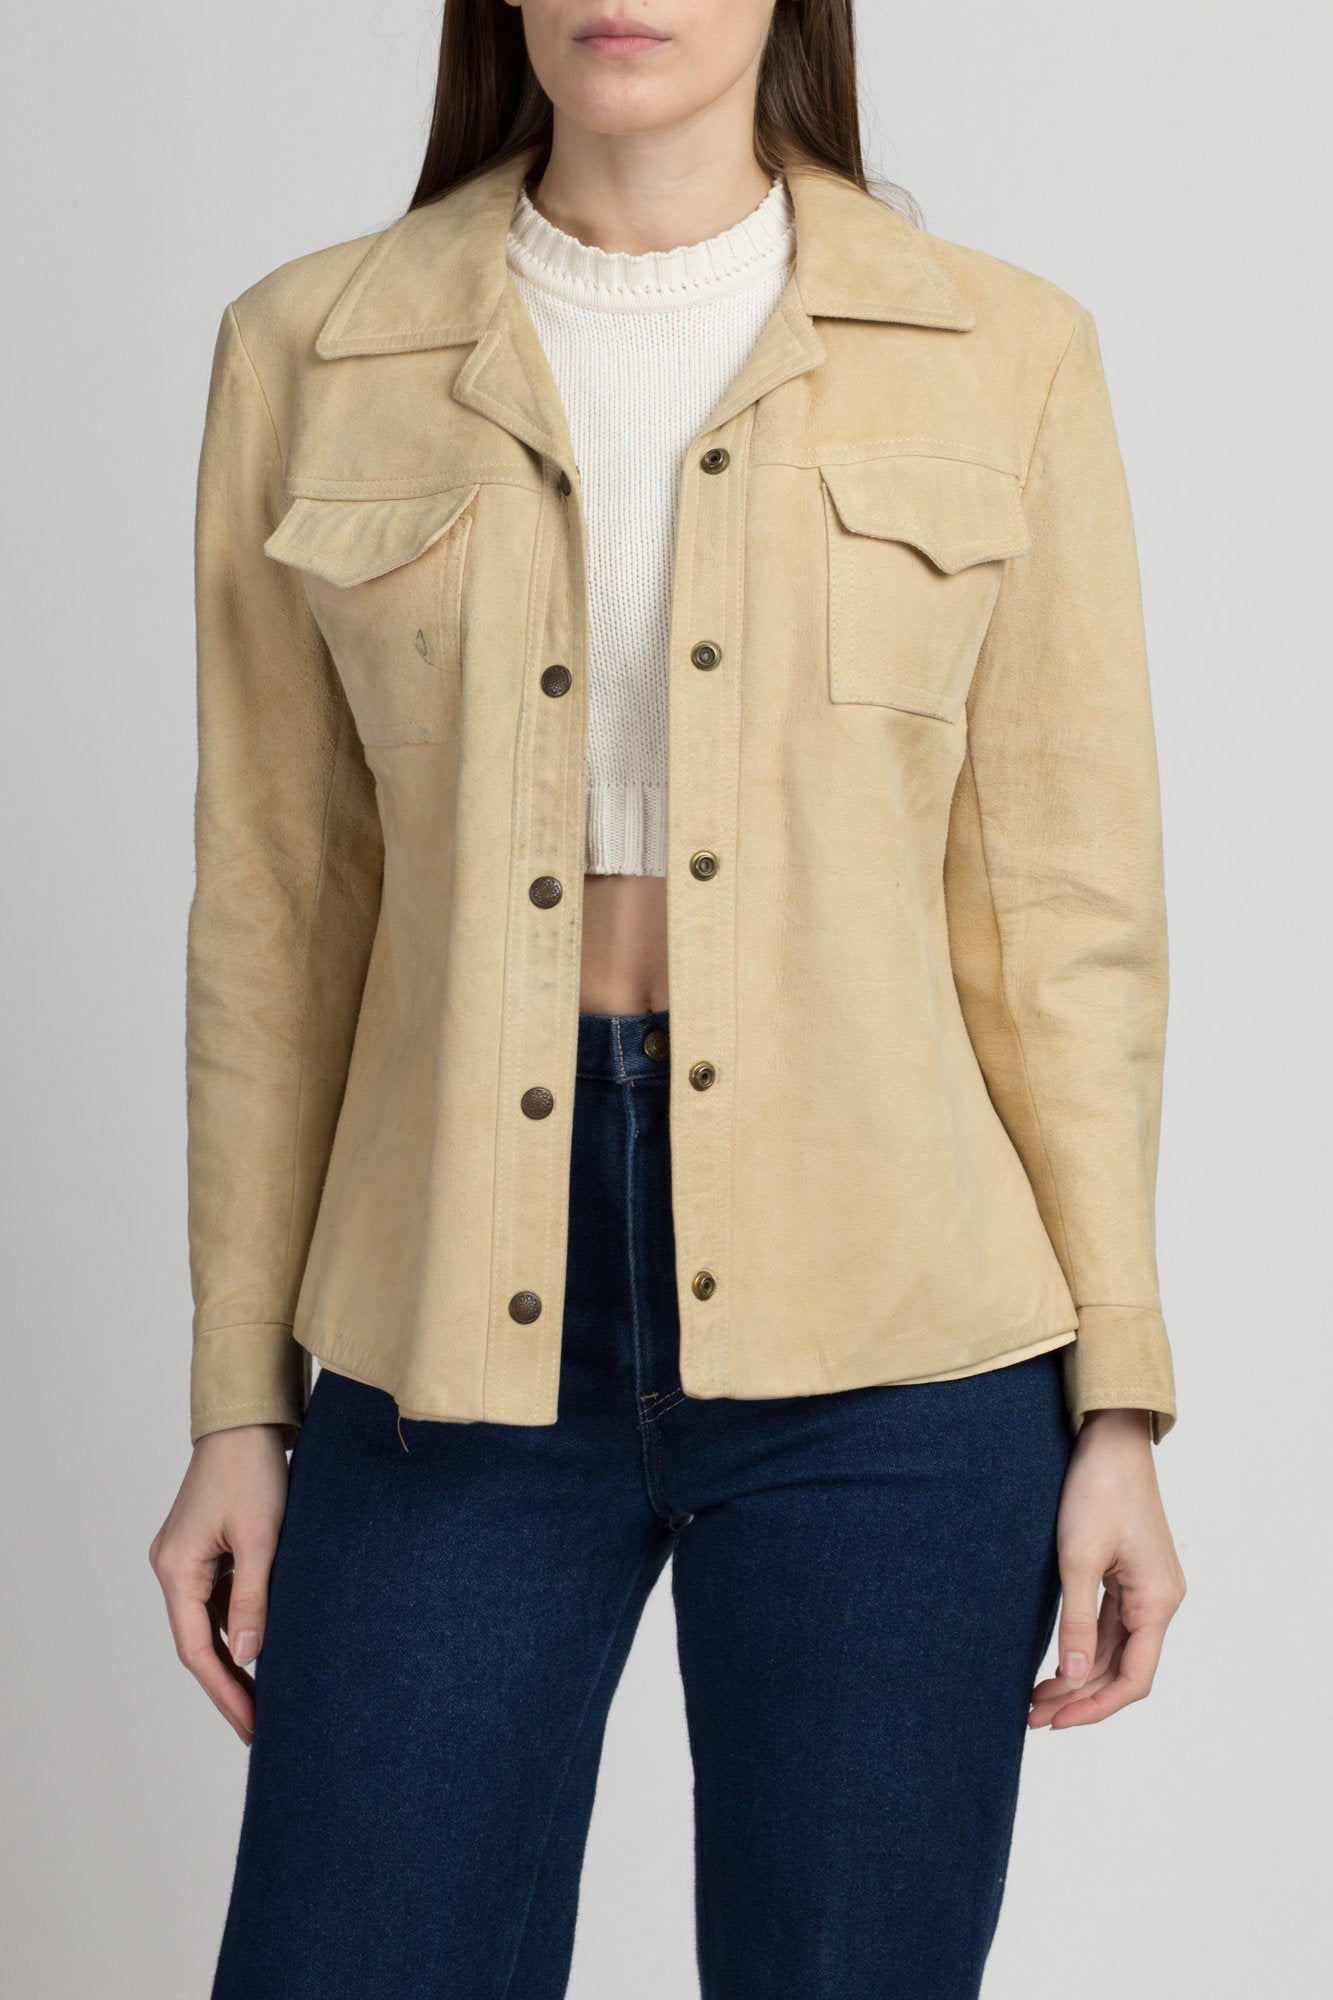 Tan Suede Jacket Outfits For Women (15 ideas & outfits) | Lookastic